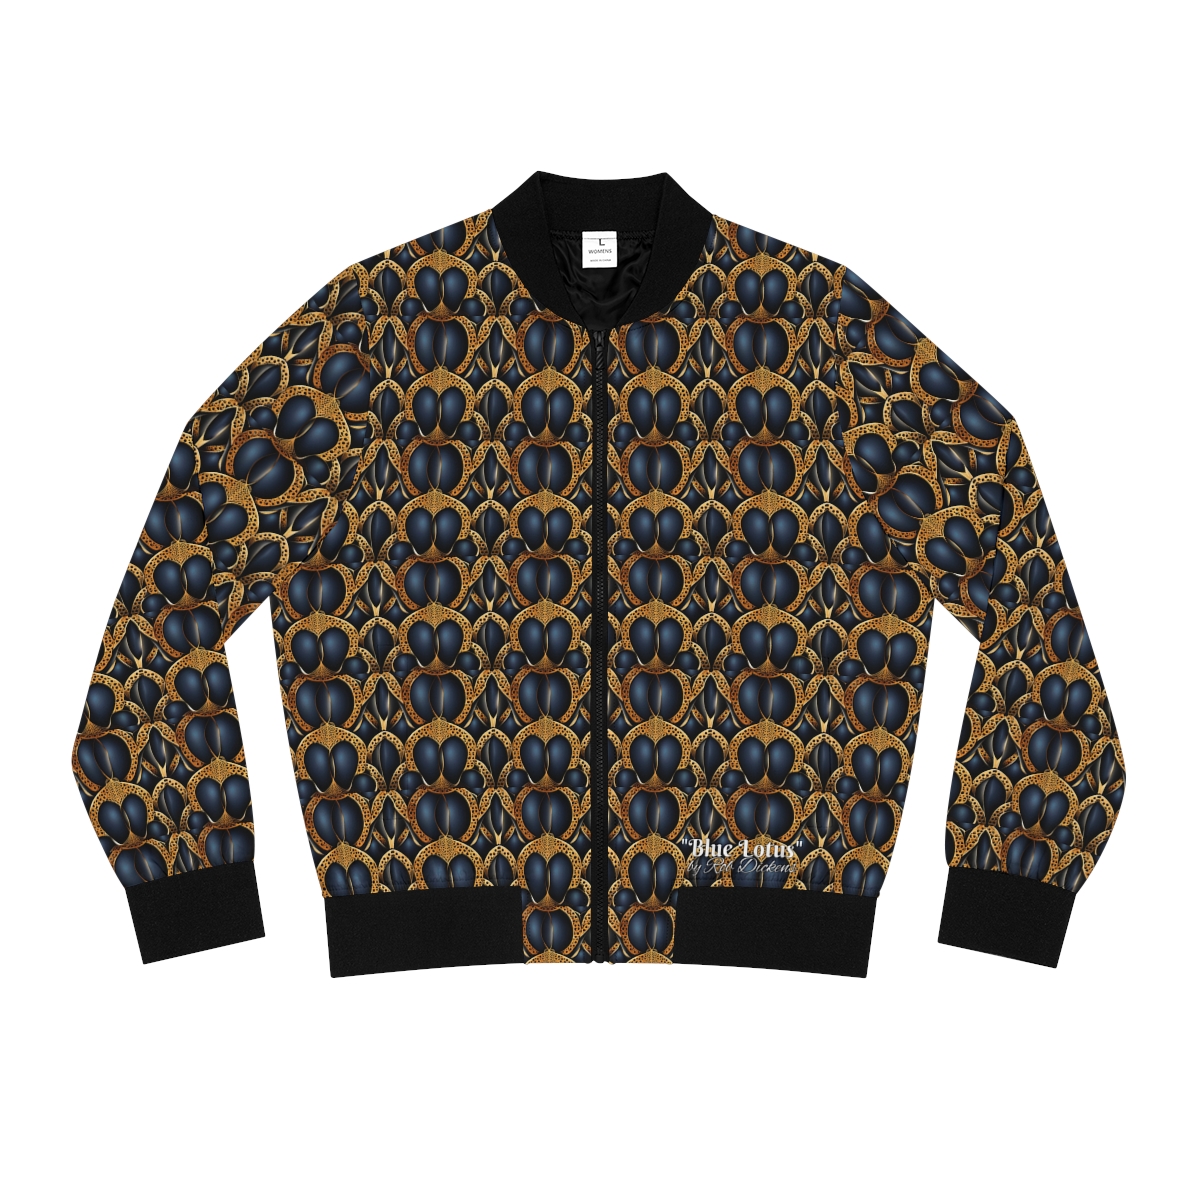 The "Blue Lotus" Bomber by Rob Dickens - Women's Bomber Jacket product thumbnail image